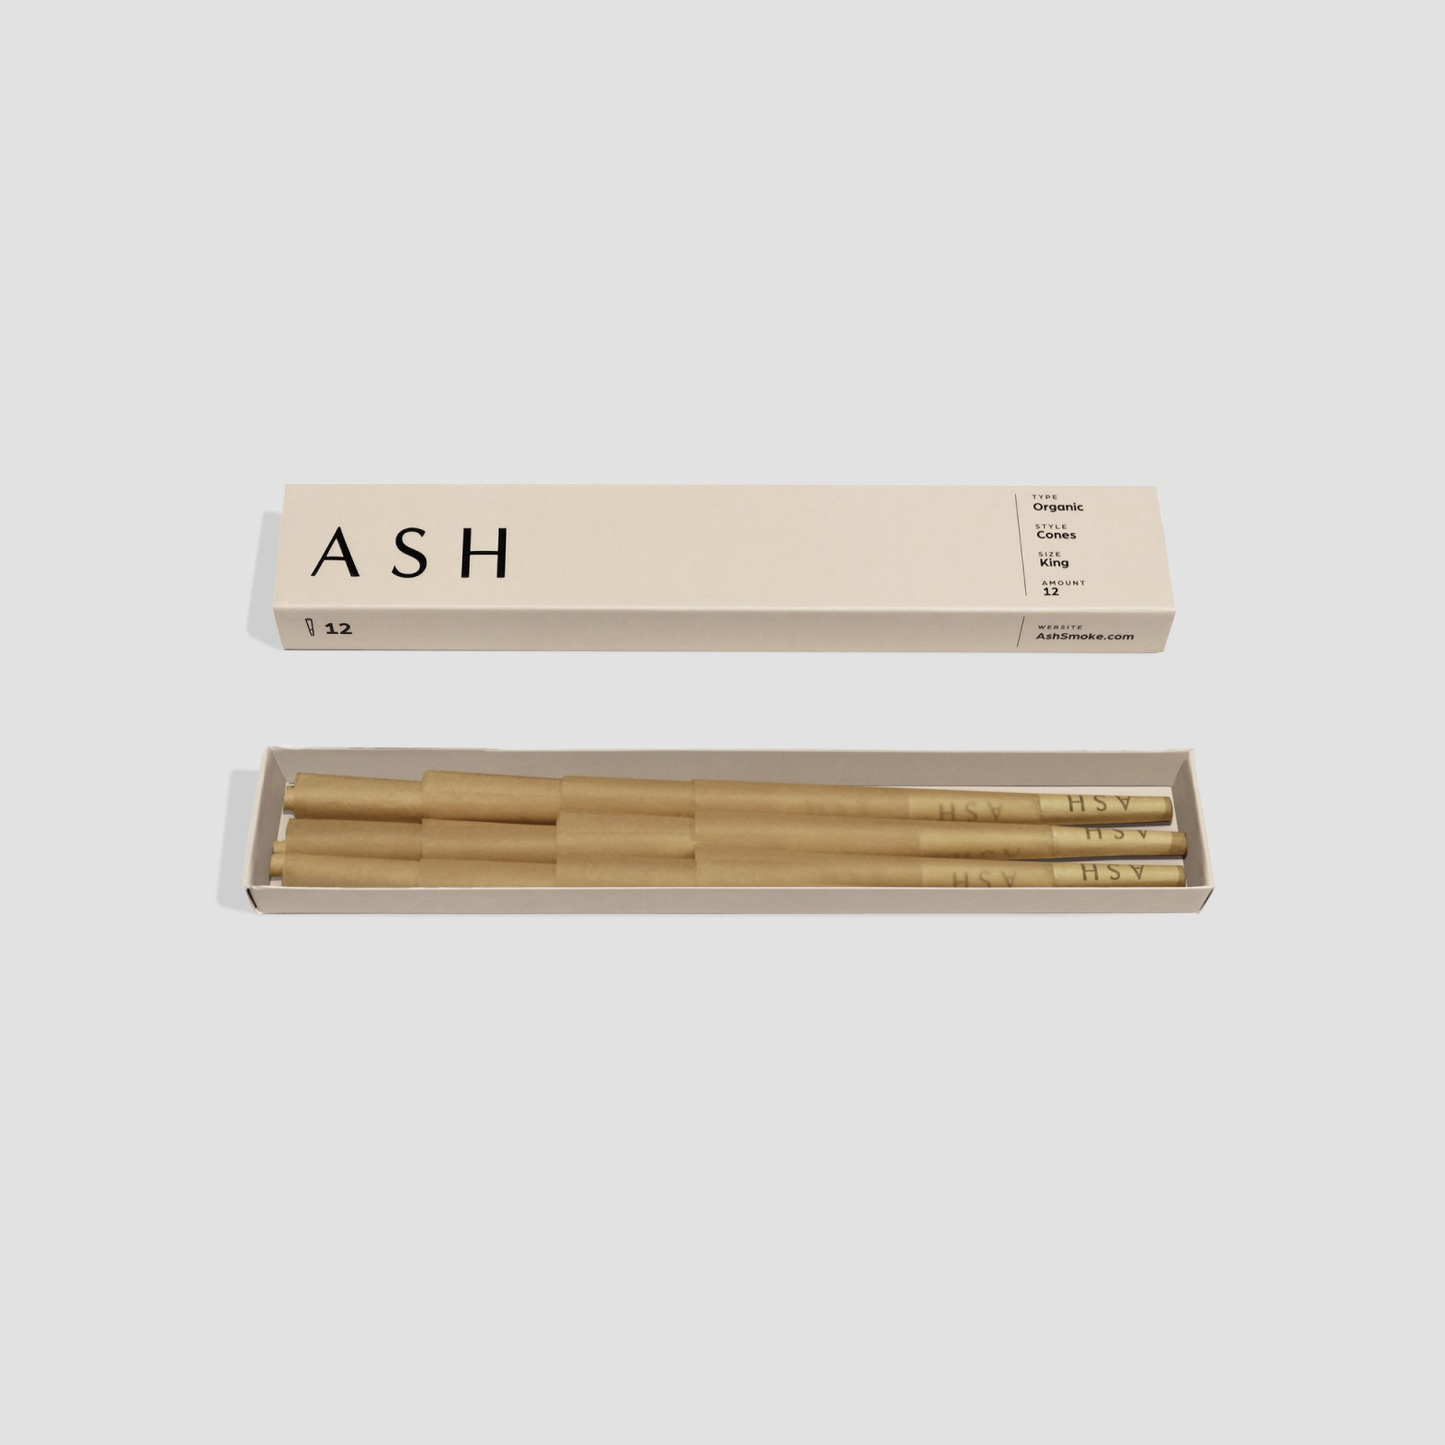 Pre-rolled Cones | Organic | 12 count ASH Rolling Paper 